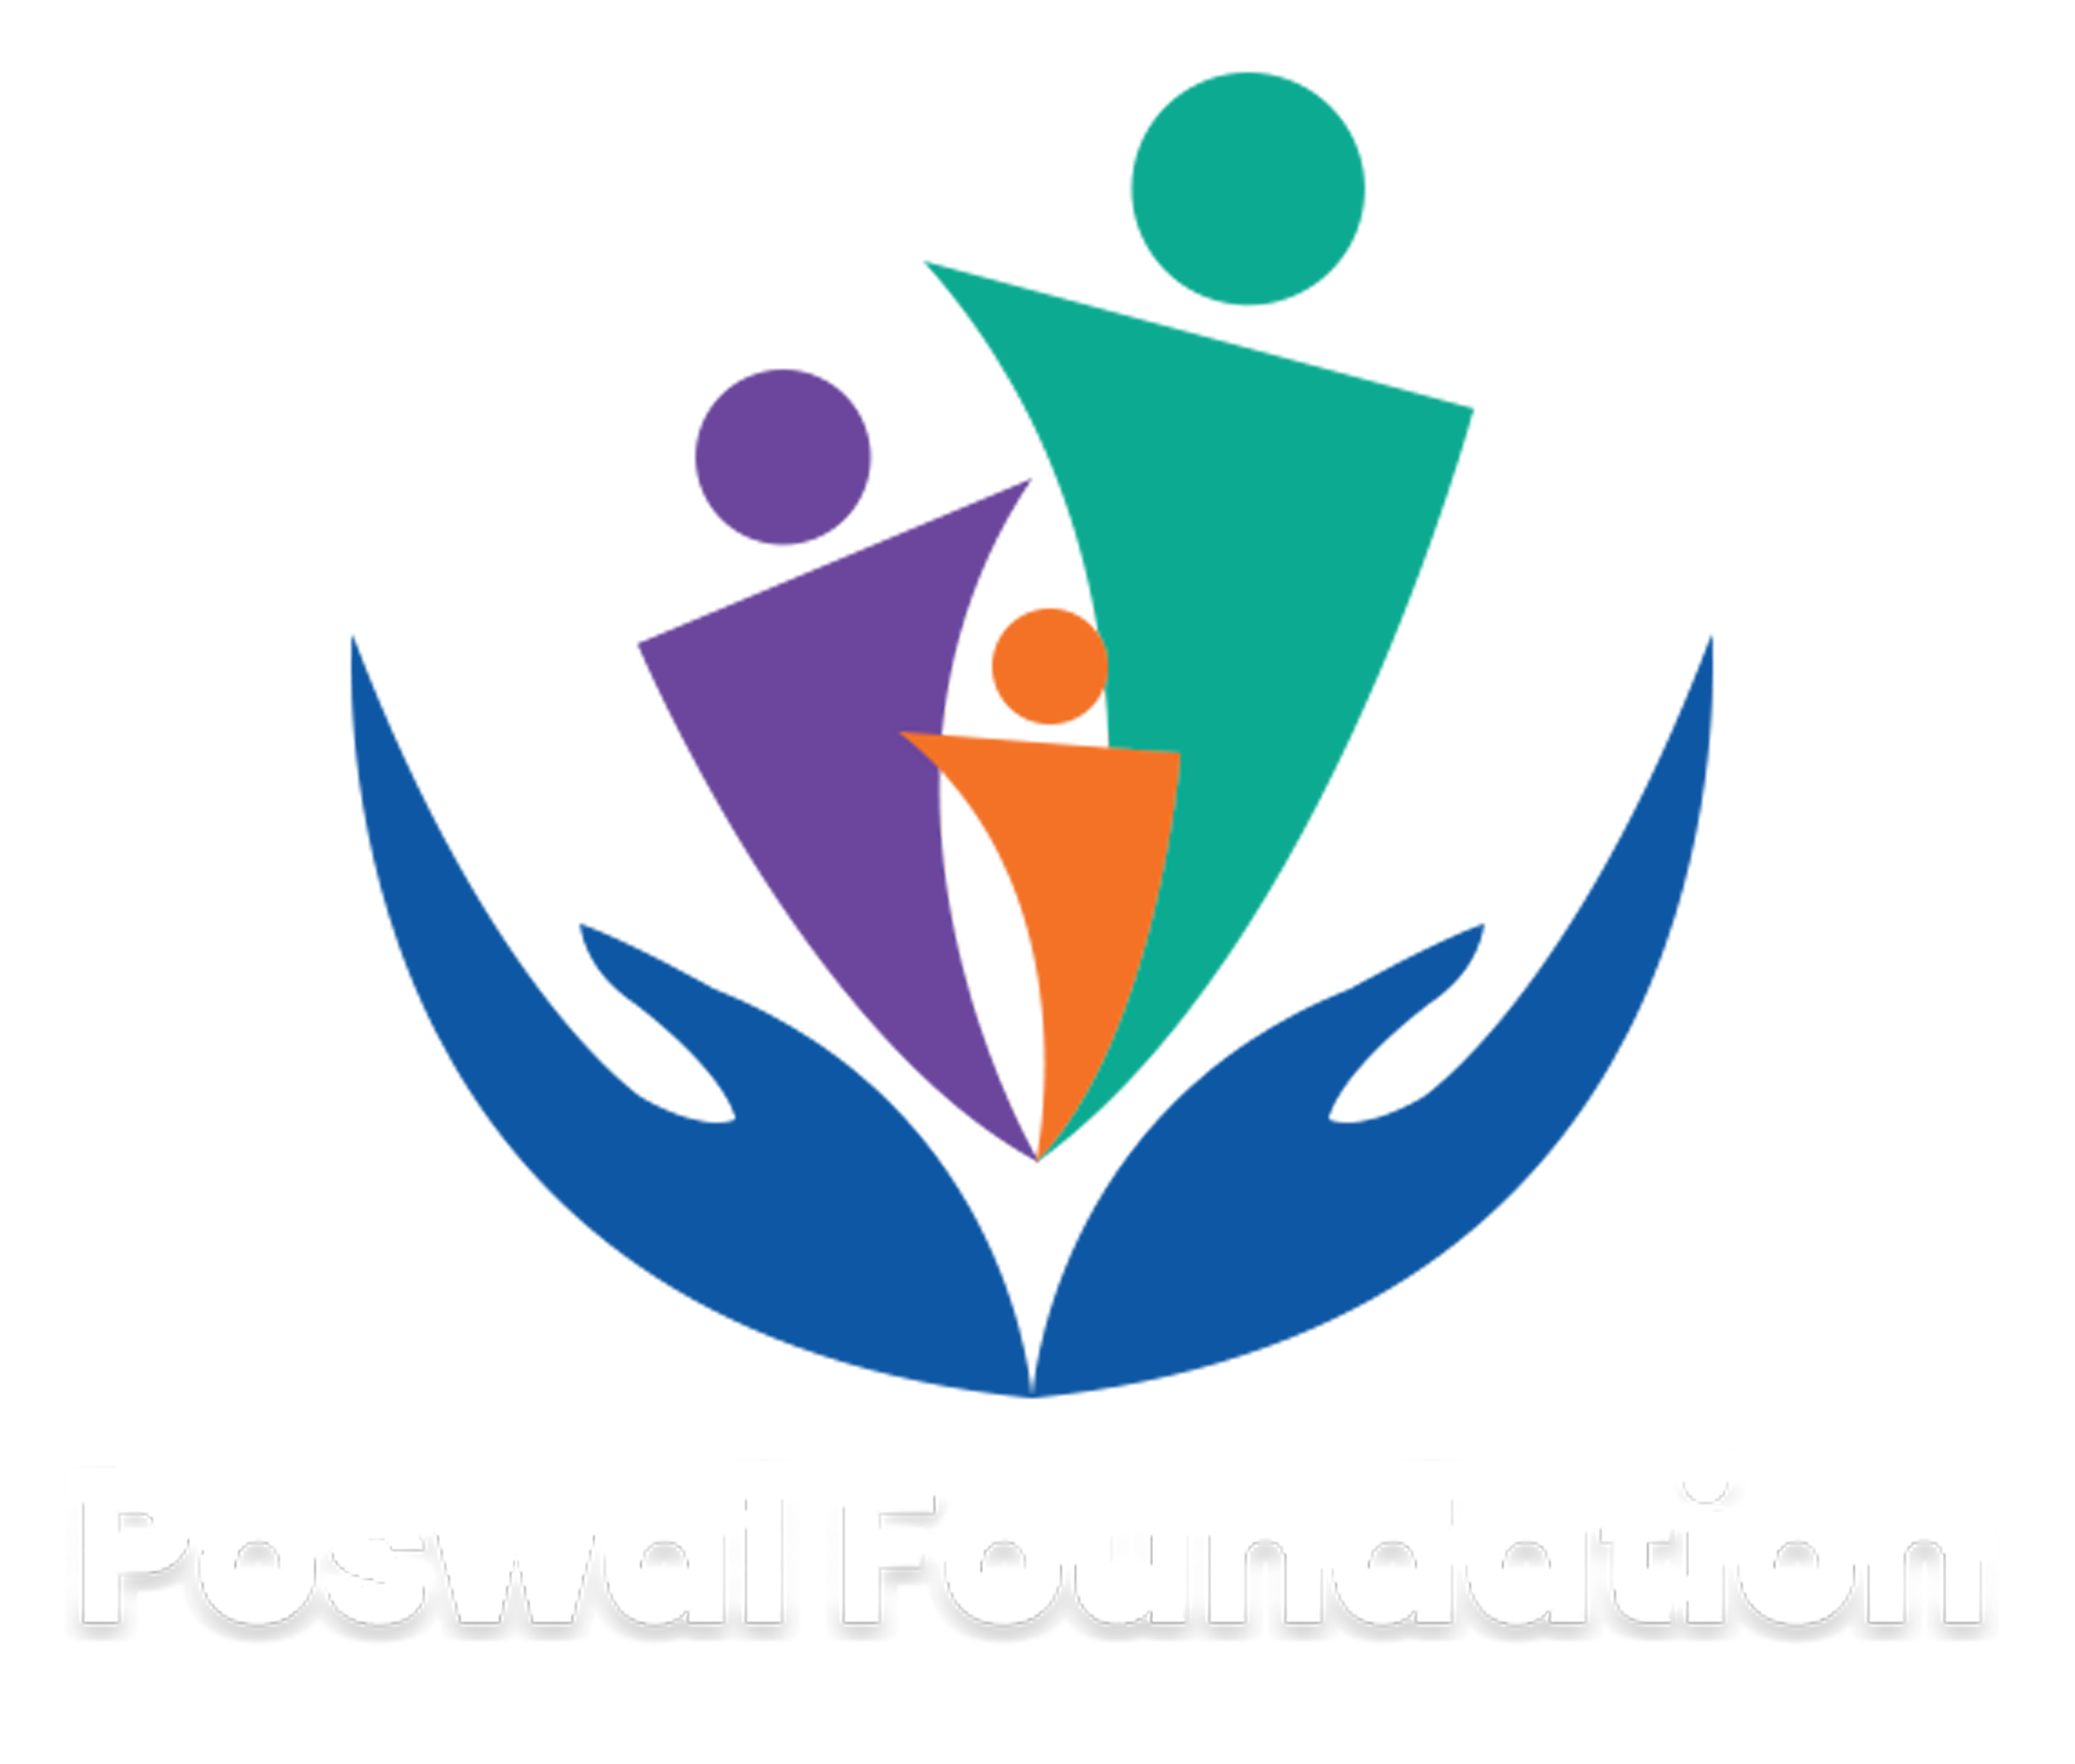 Poswal Foundation: Fostering Sustainable Development